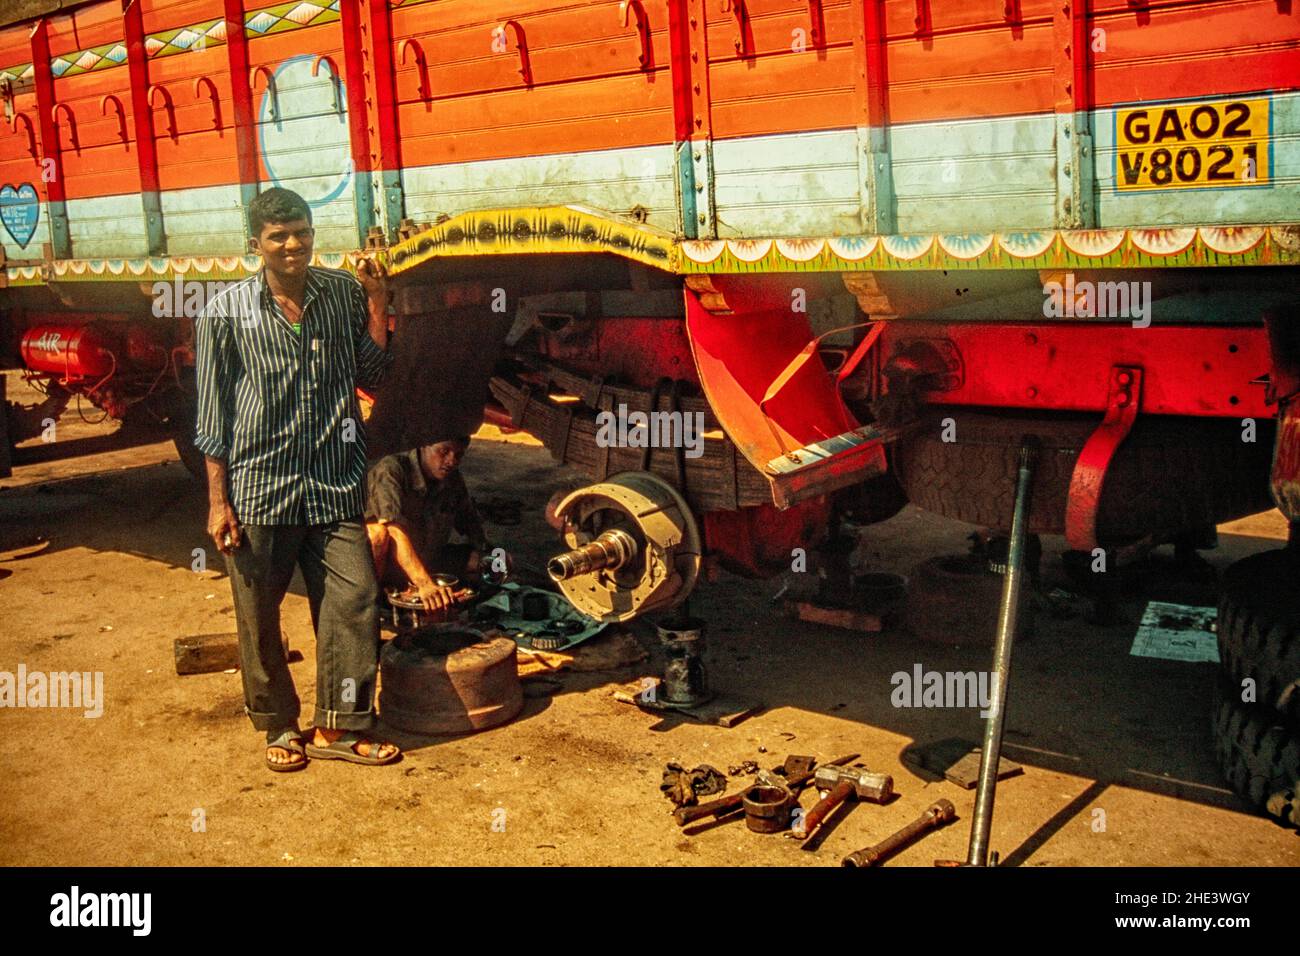 Truck mechanic posing with the lorry he is working on in the open air, Goa, India Stock Photo